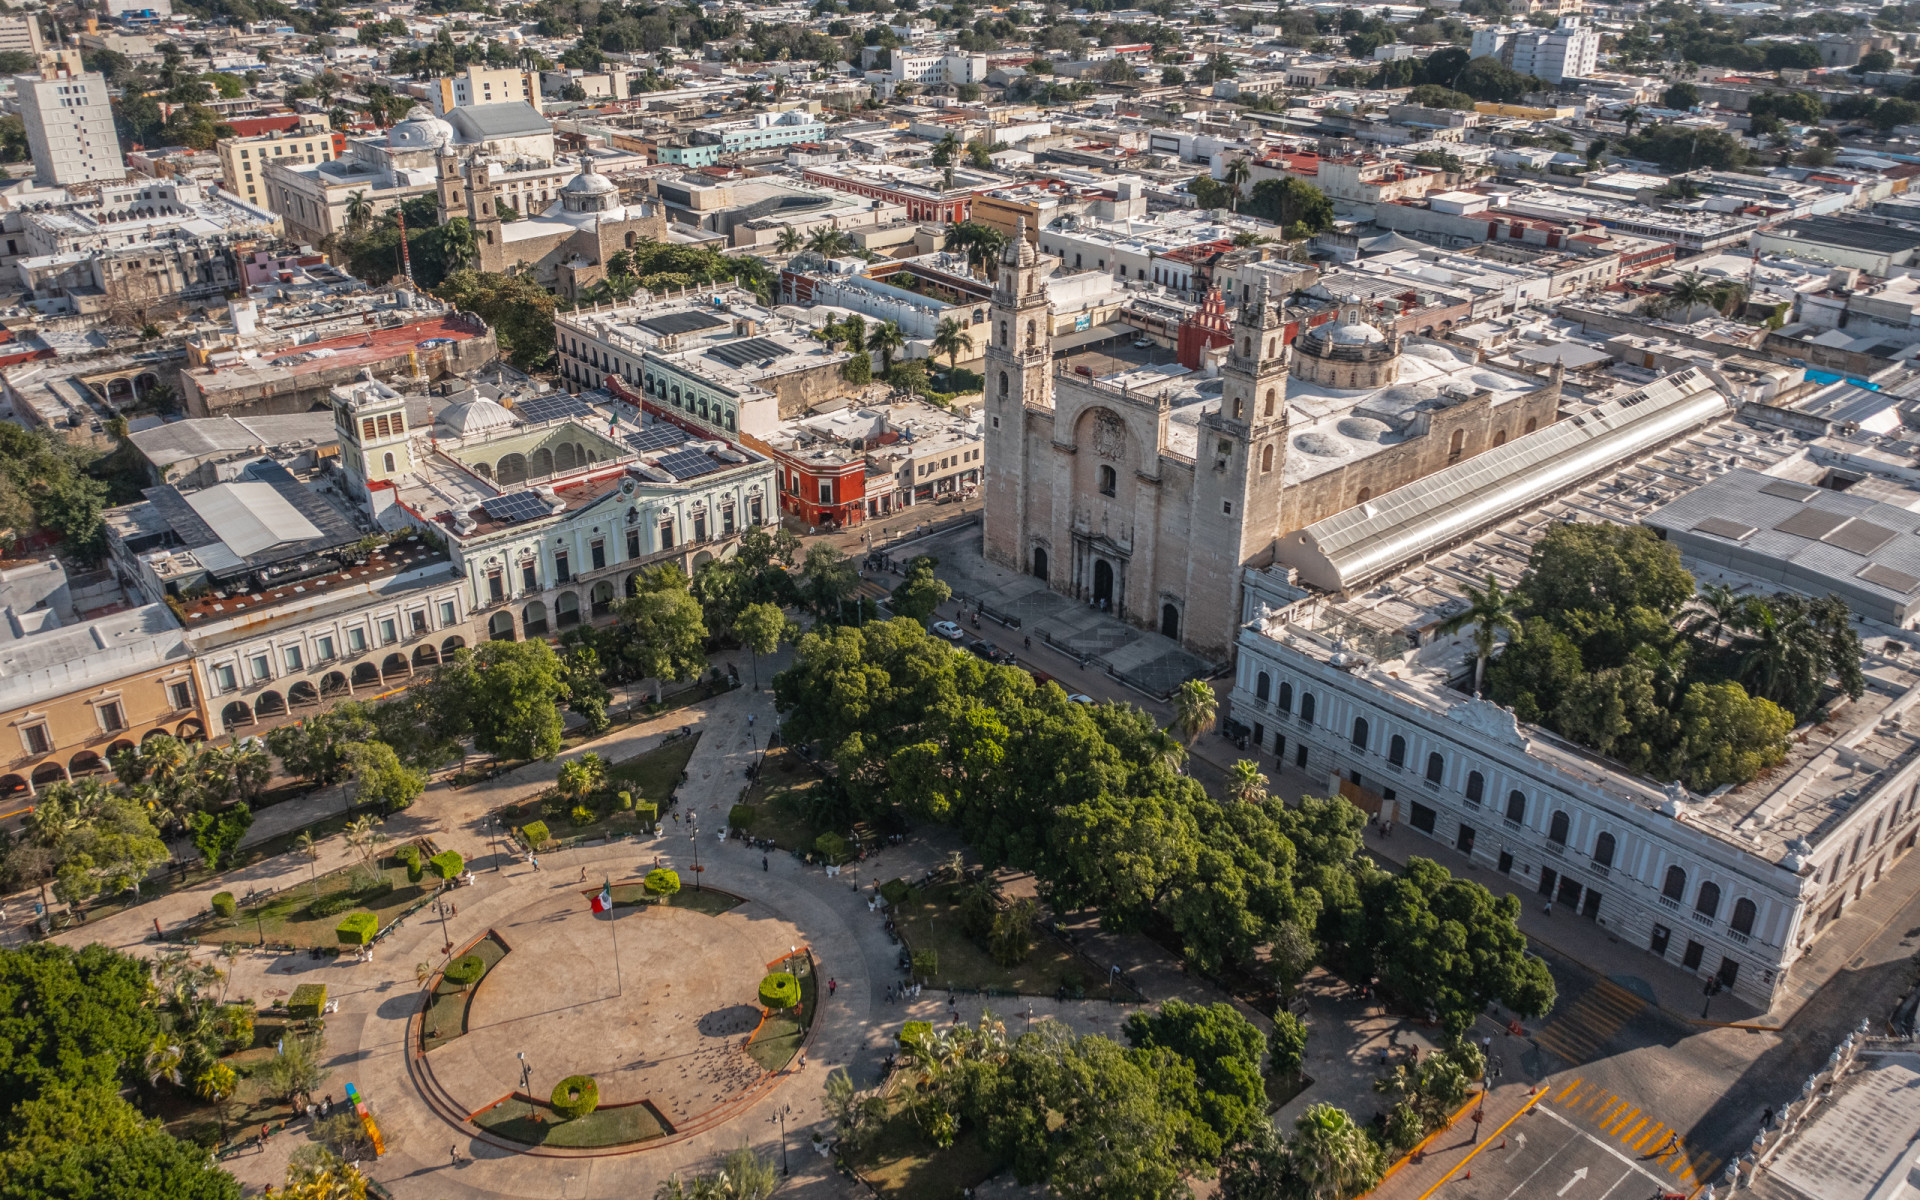 <p>Mérida, the vibrant capital of the Mexican state of Yucatán, has a rich Mayan and colonial heritage. A former American Capital of Culture, the city contrasts this historic canvas with a wealth of designer boutique hotels and noted culinary hotspots.</p><p>You may also like:<a href="https://www.starsinsider.com/n/358466?utm_source=msn.com&utm_medium=display&utm_campaign=referral_description&utm_content=636762en-en"> Sports stars you didn't know had medical conditions</a></p>